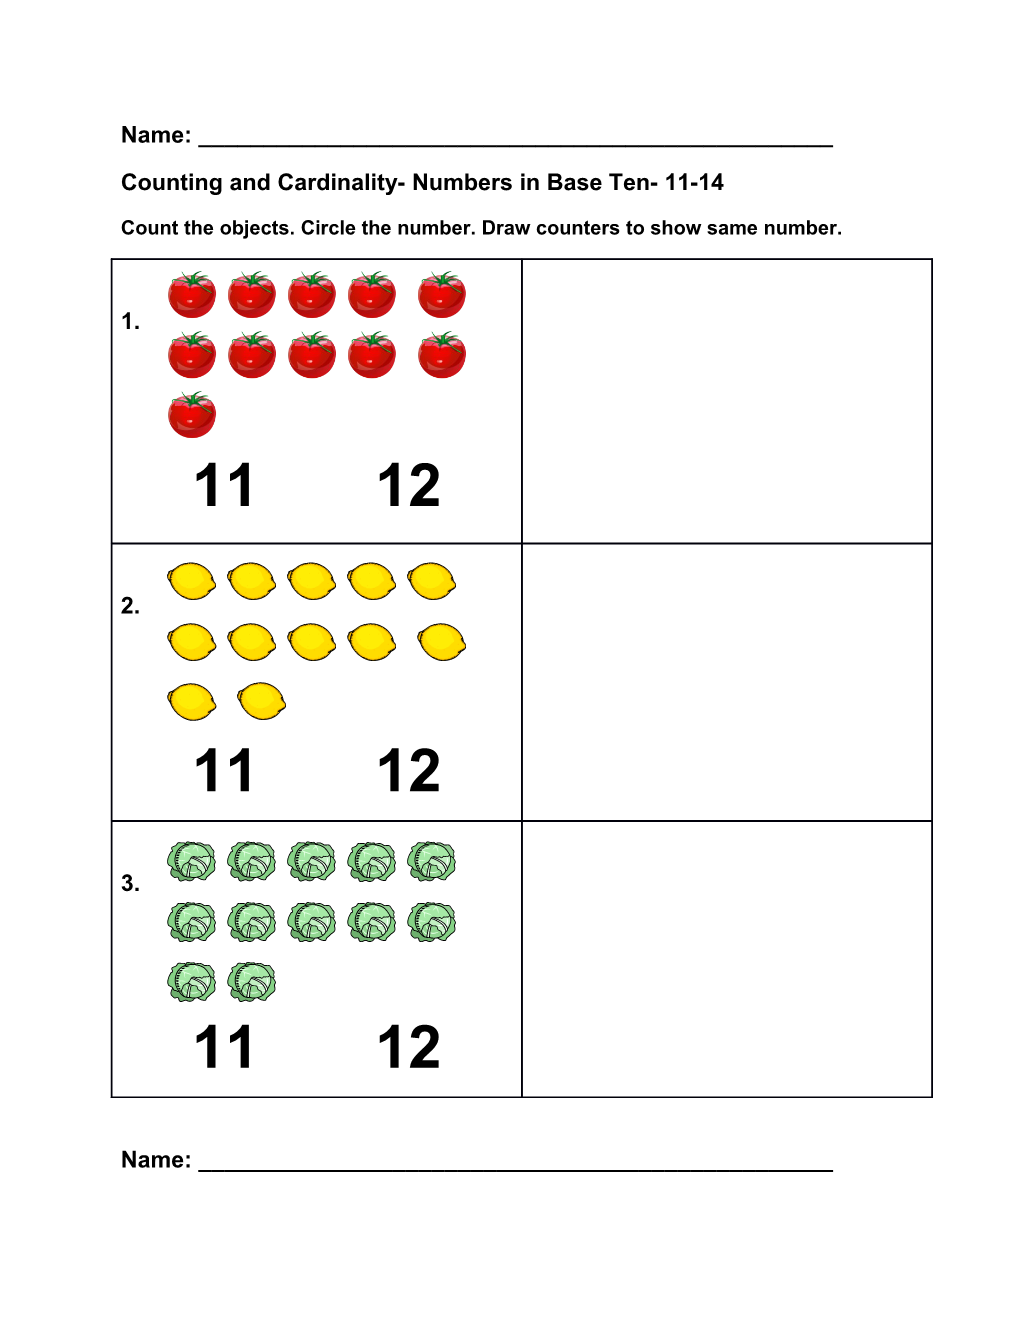 Counting and Cardinality- Numbers in Base Ten- 11-14